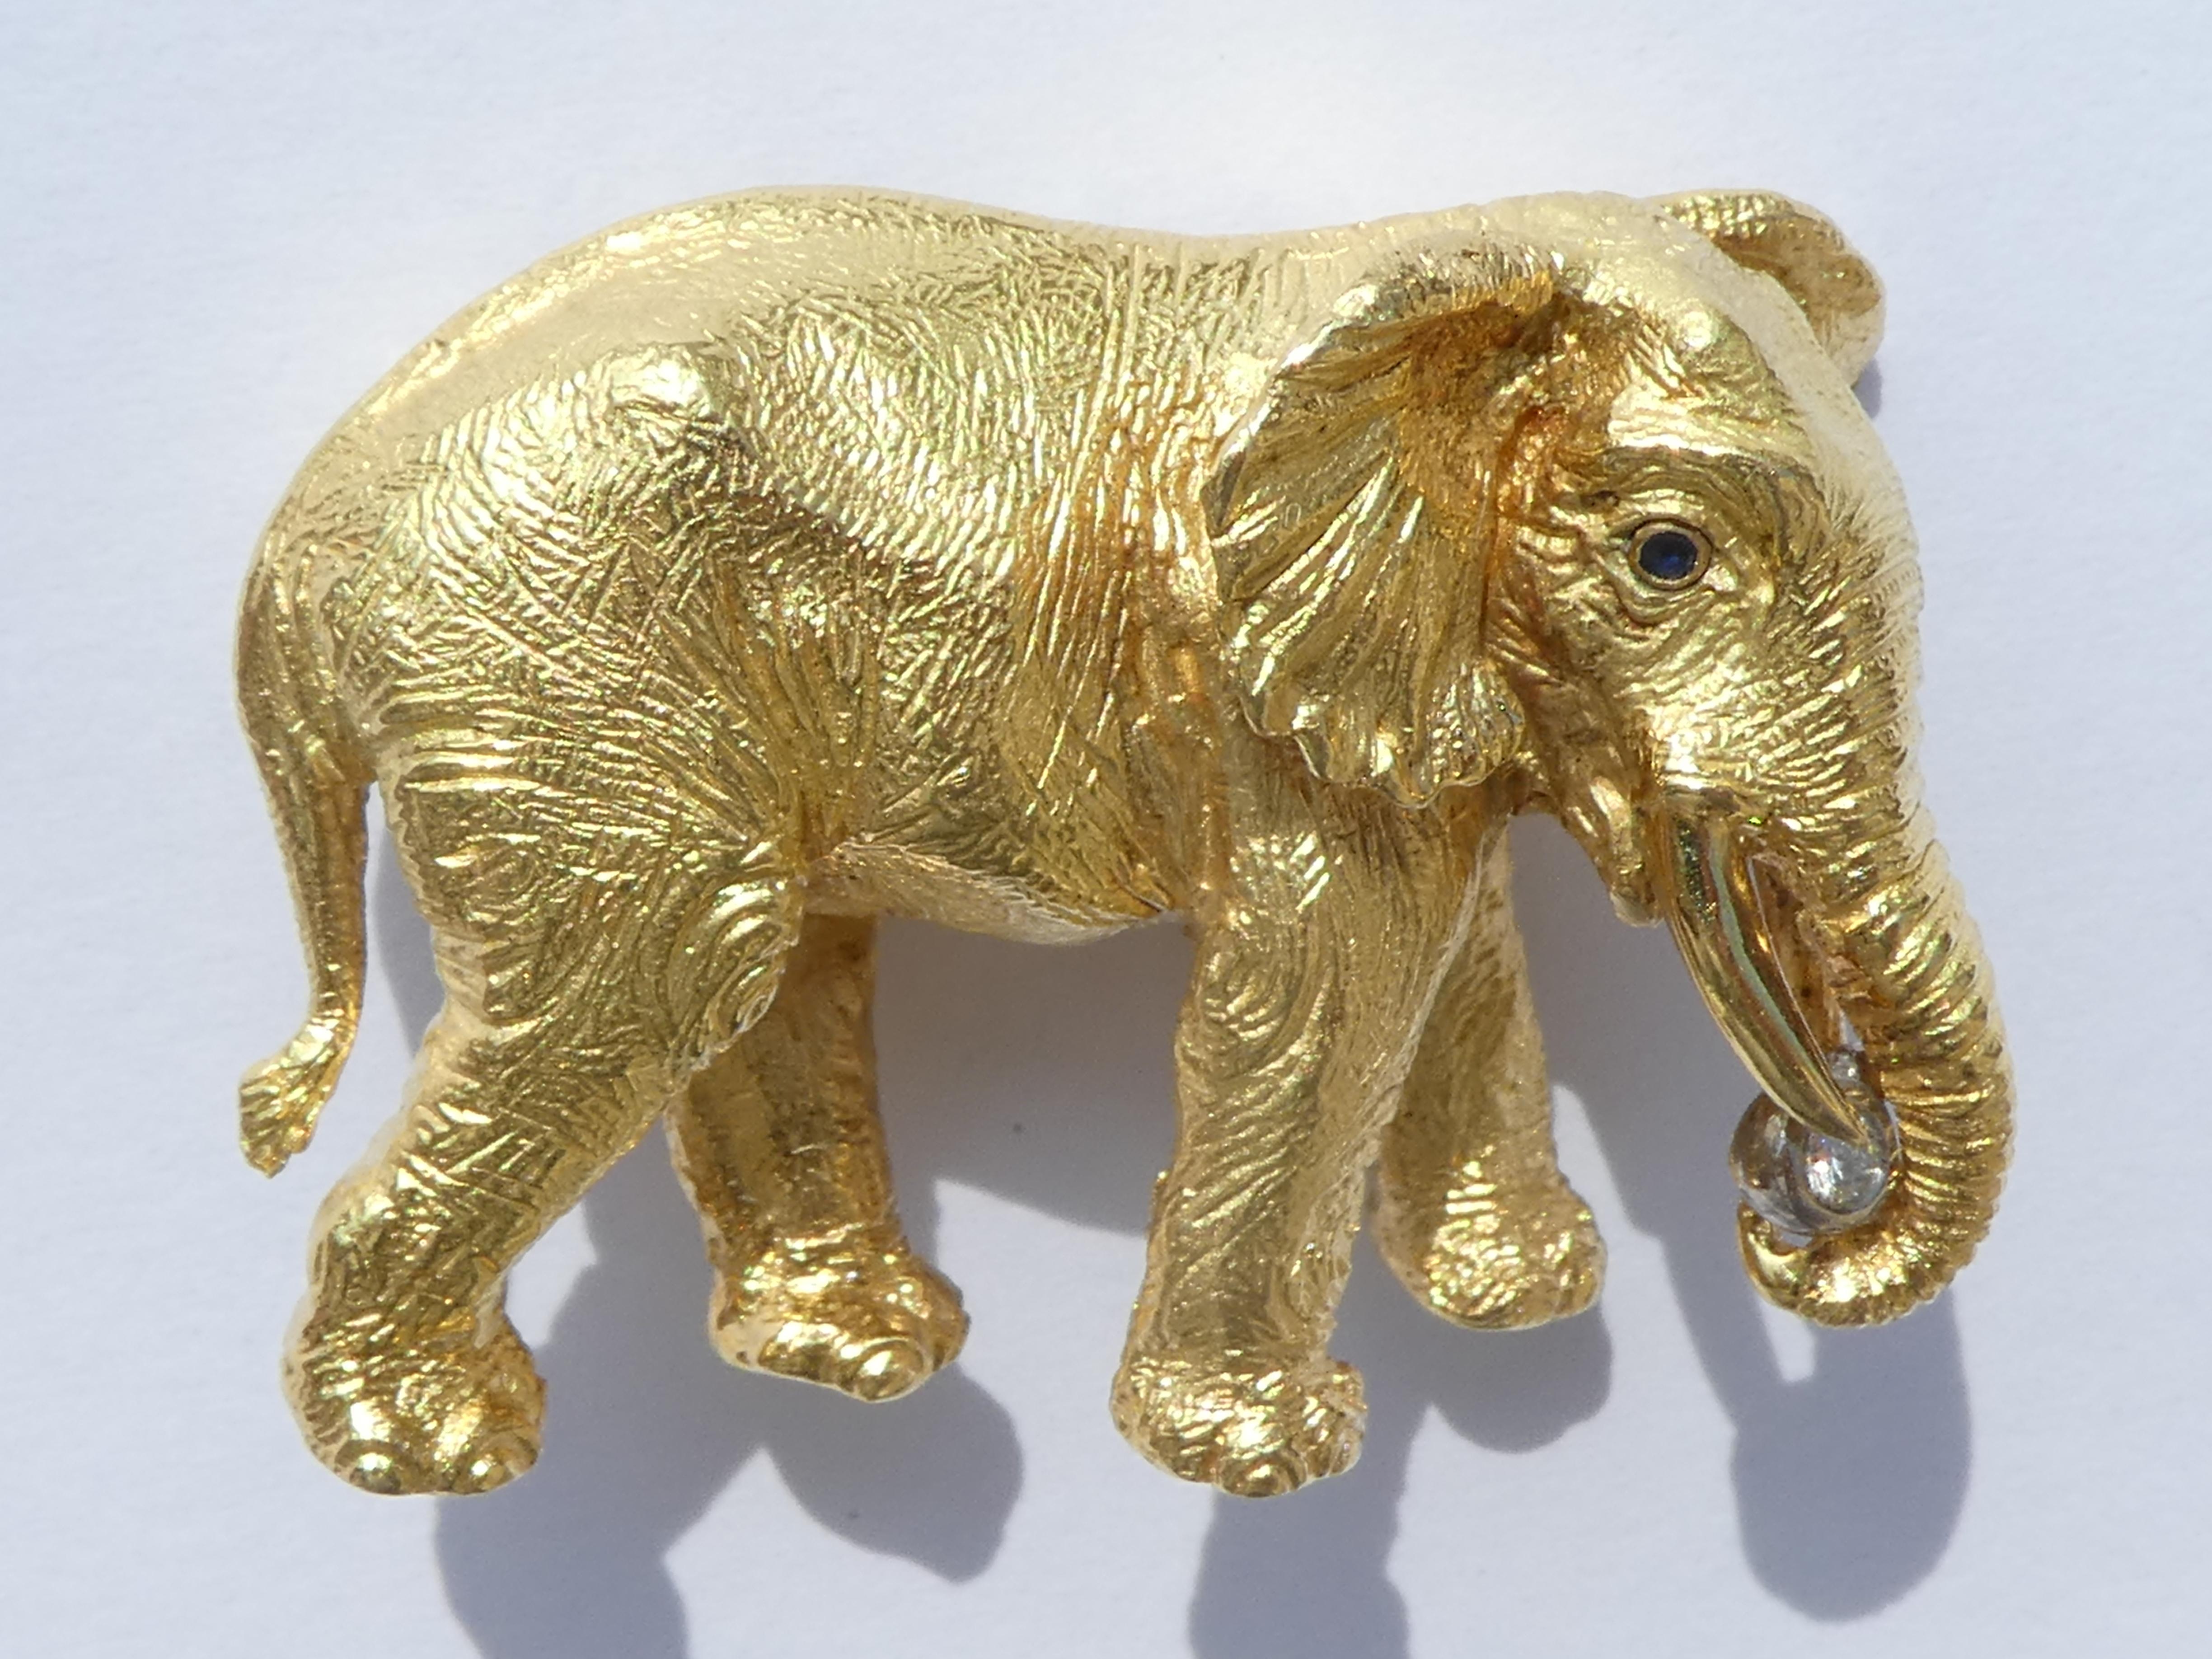 A naturalistic elephant brooch with every wrinkle of the skin beautifully visible made of 18k yellow gold (stamps: 18 k & 750) by Tiffany & Co. Germany and dated 1989 (all of this is stamped). It has 2 round blue sapphire eyes (1 in the front and 1